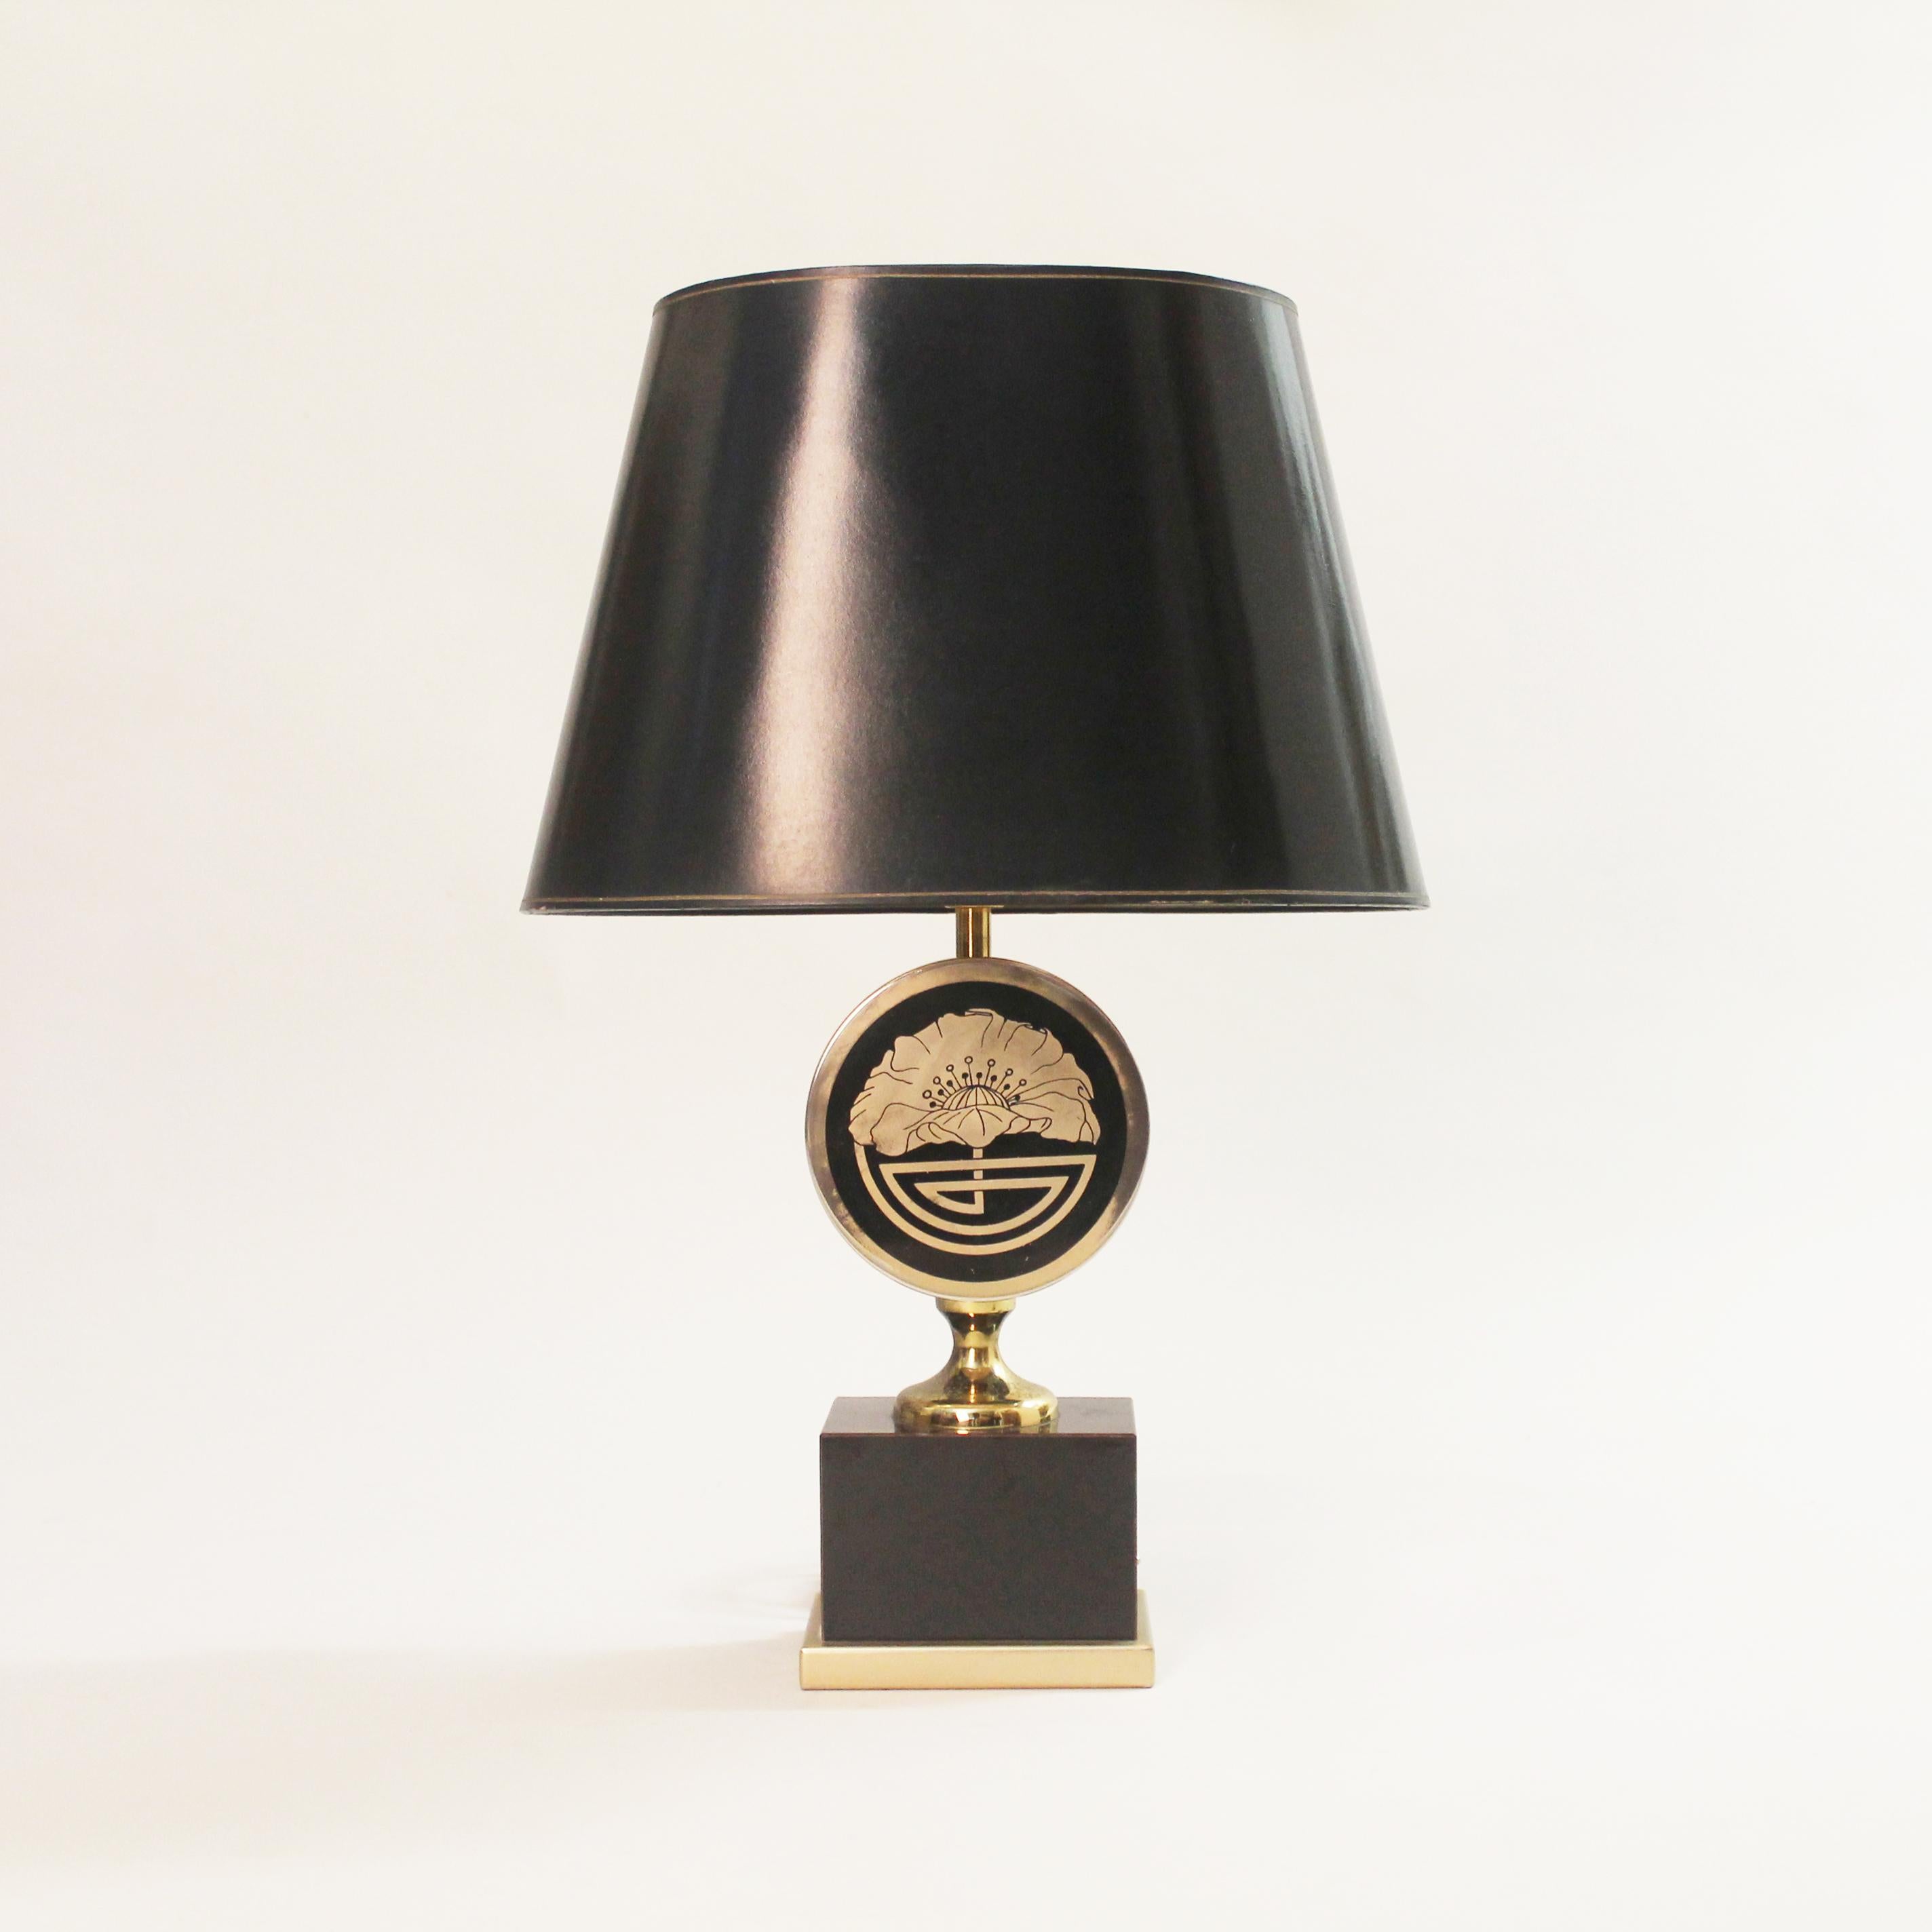 Unique table lamp on a black base, topped with a round elaborate flower and geometric design in the Art Deco style. Black gold oval shade is included. 

Please contact us for international quotes.

CREATOR: Maison Jansen

PLACE OF ORIGIN: